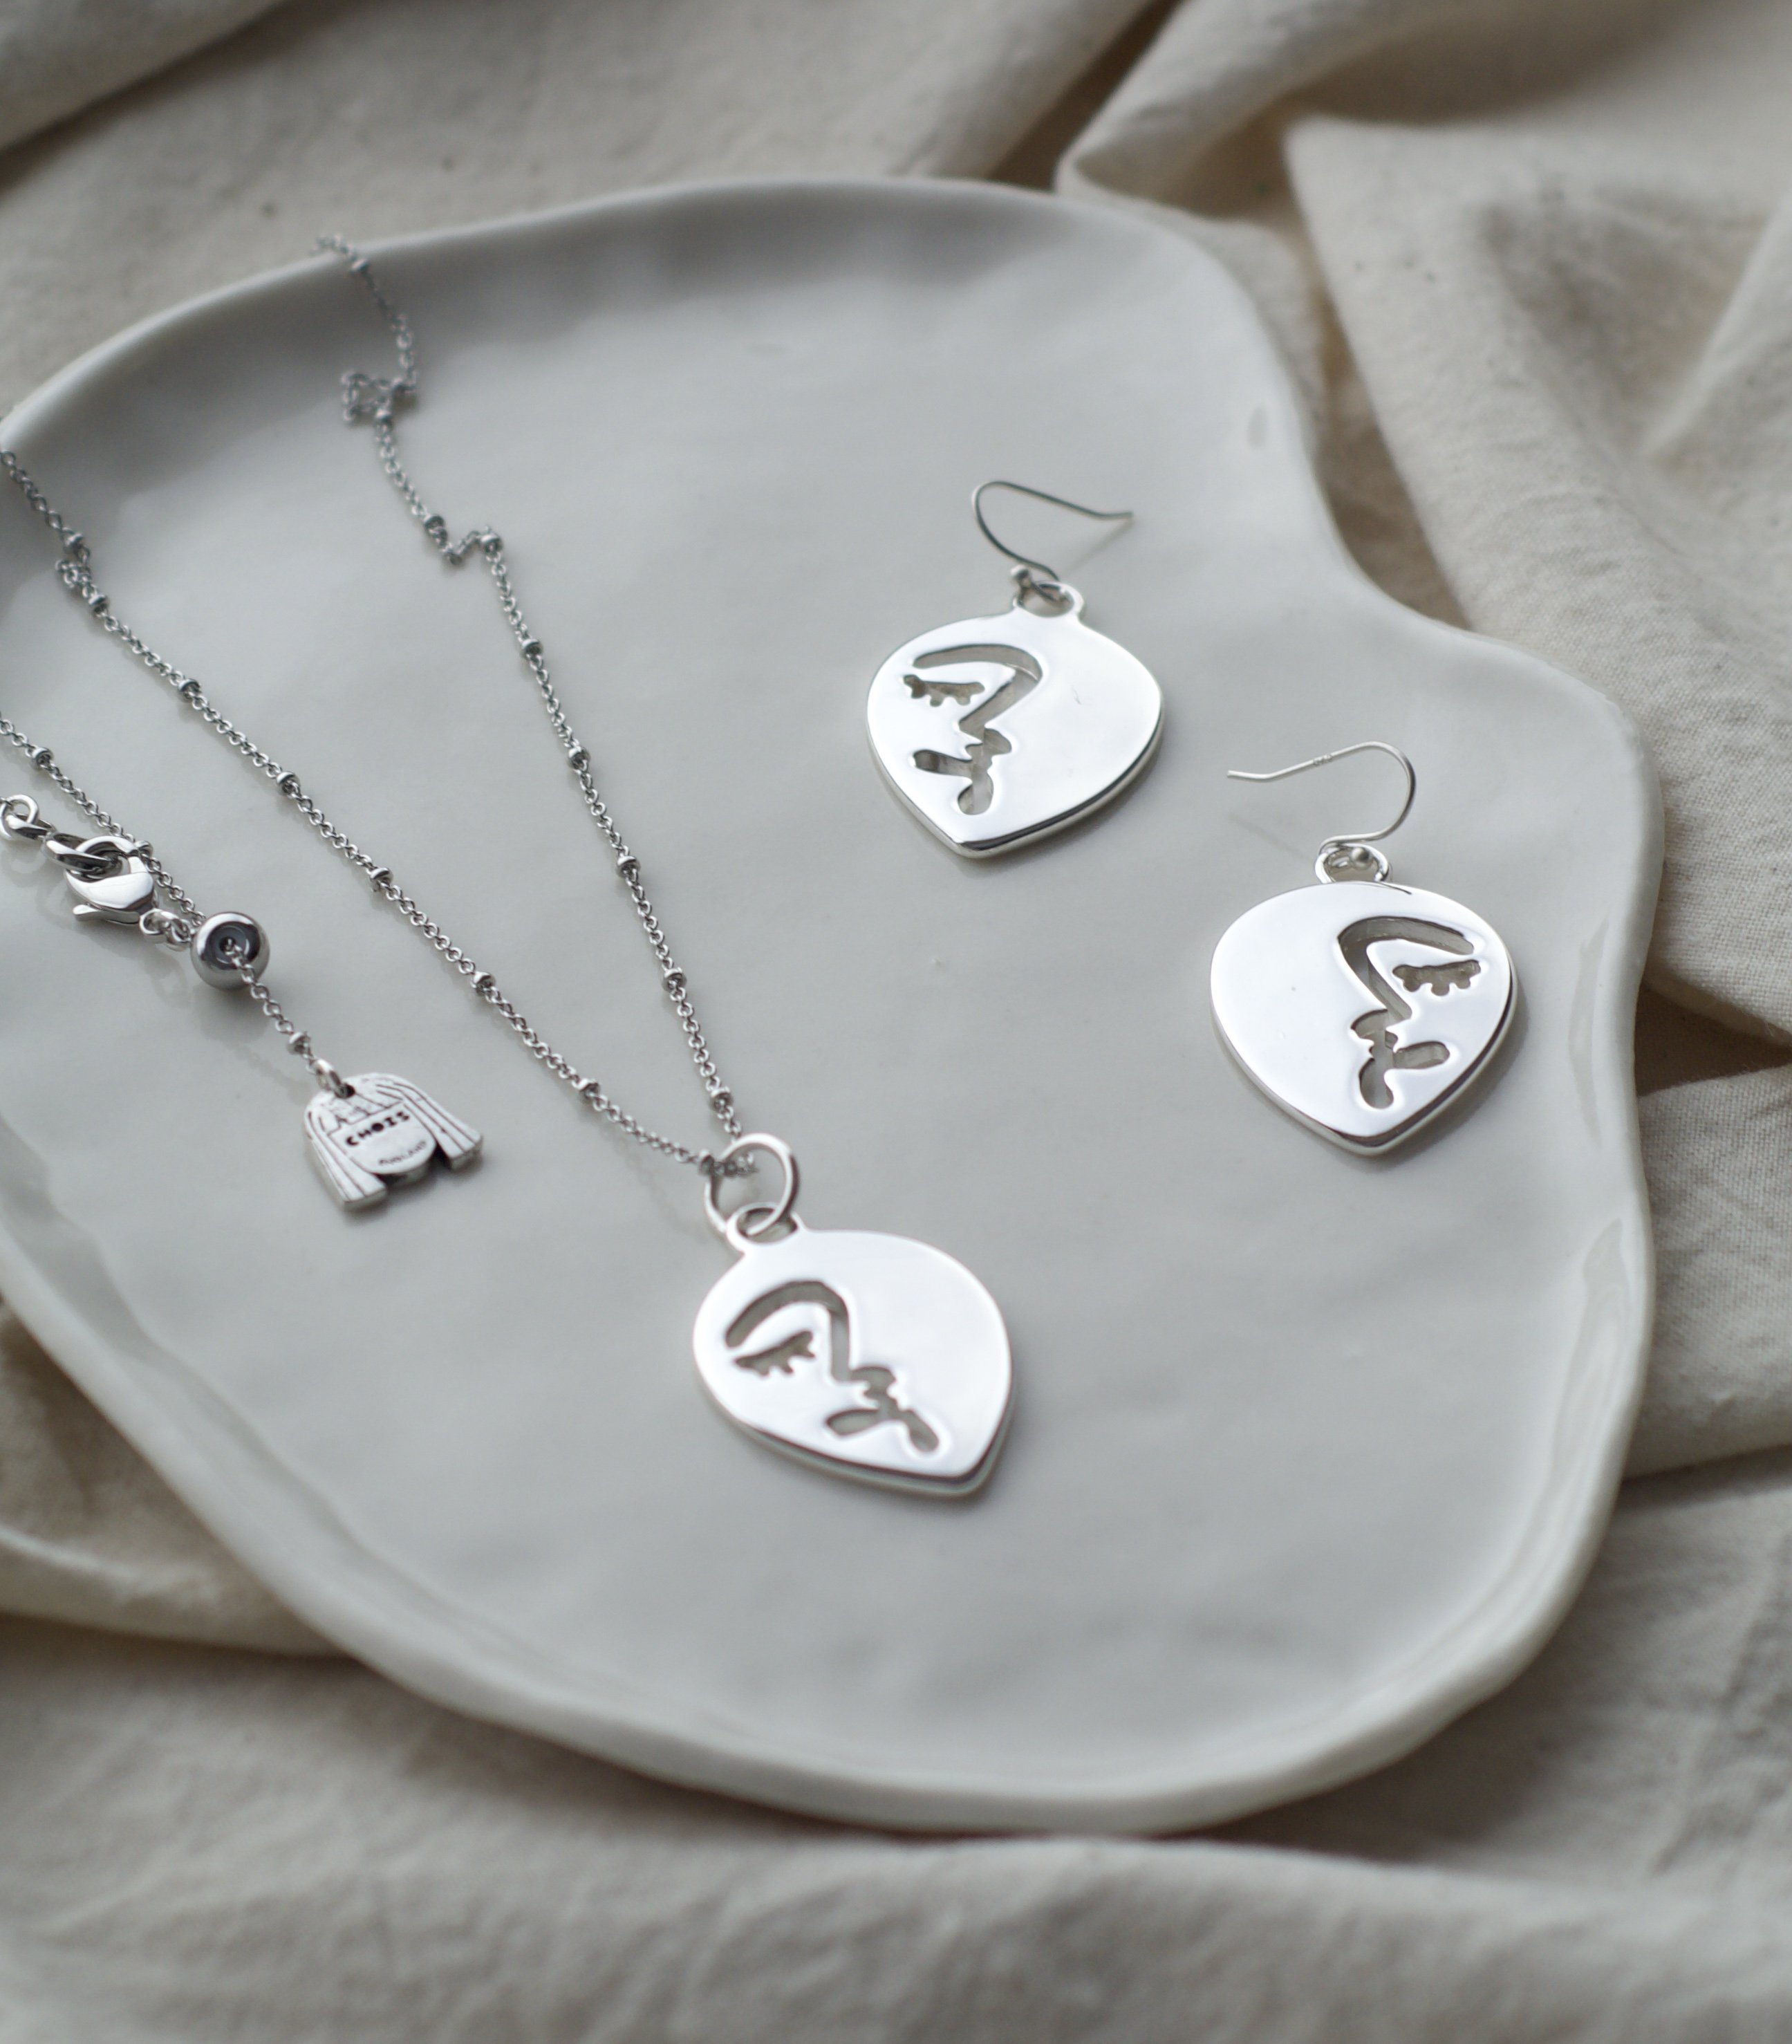 Abstract Face Pendant Necklace & Earring Set In White Gold Tone